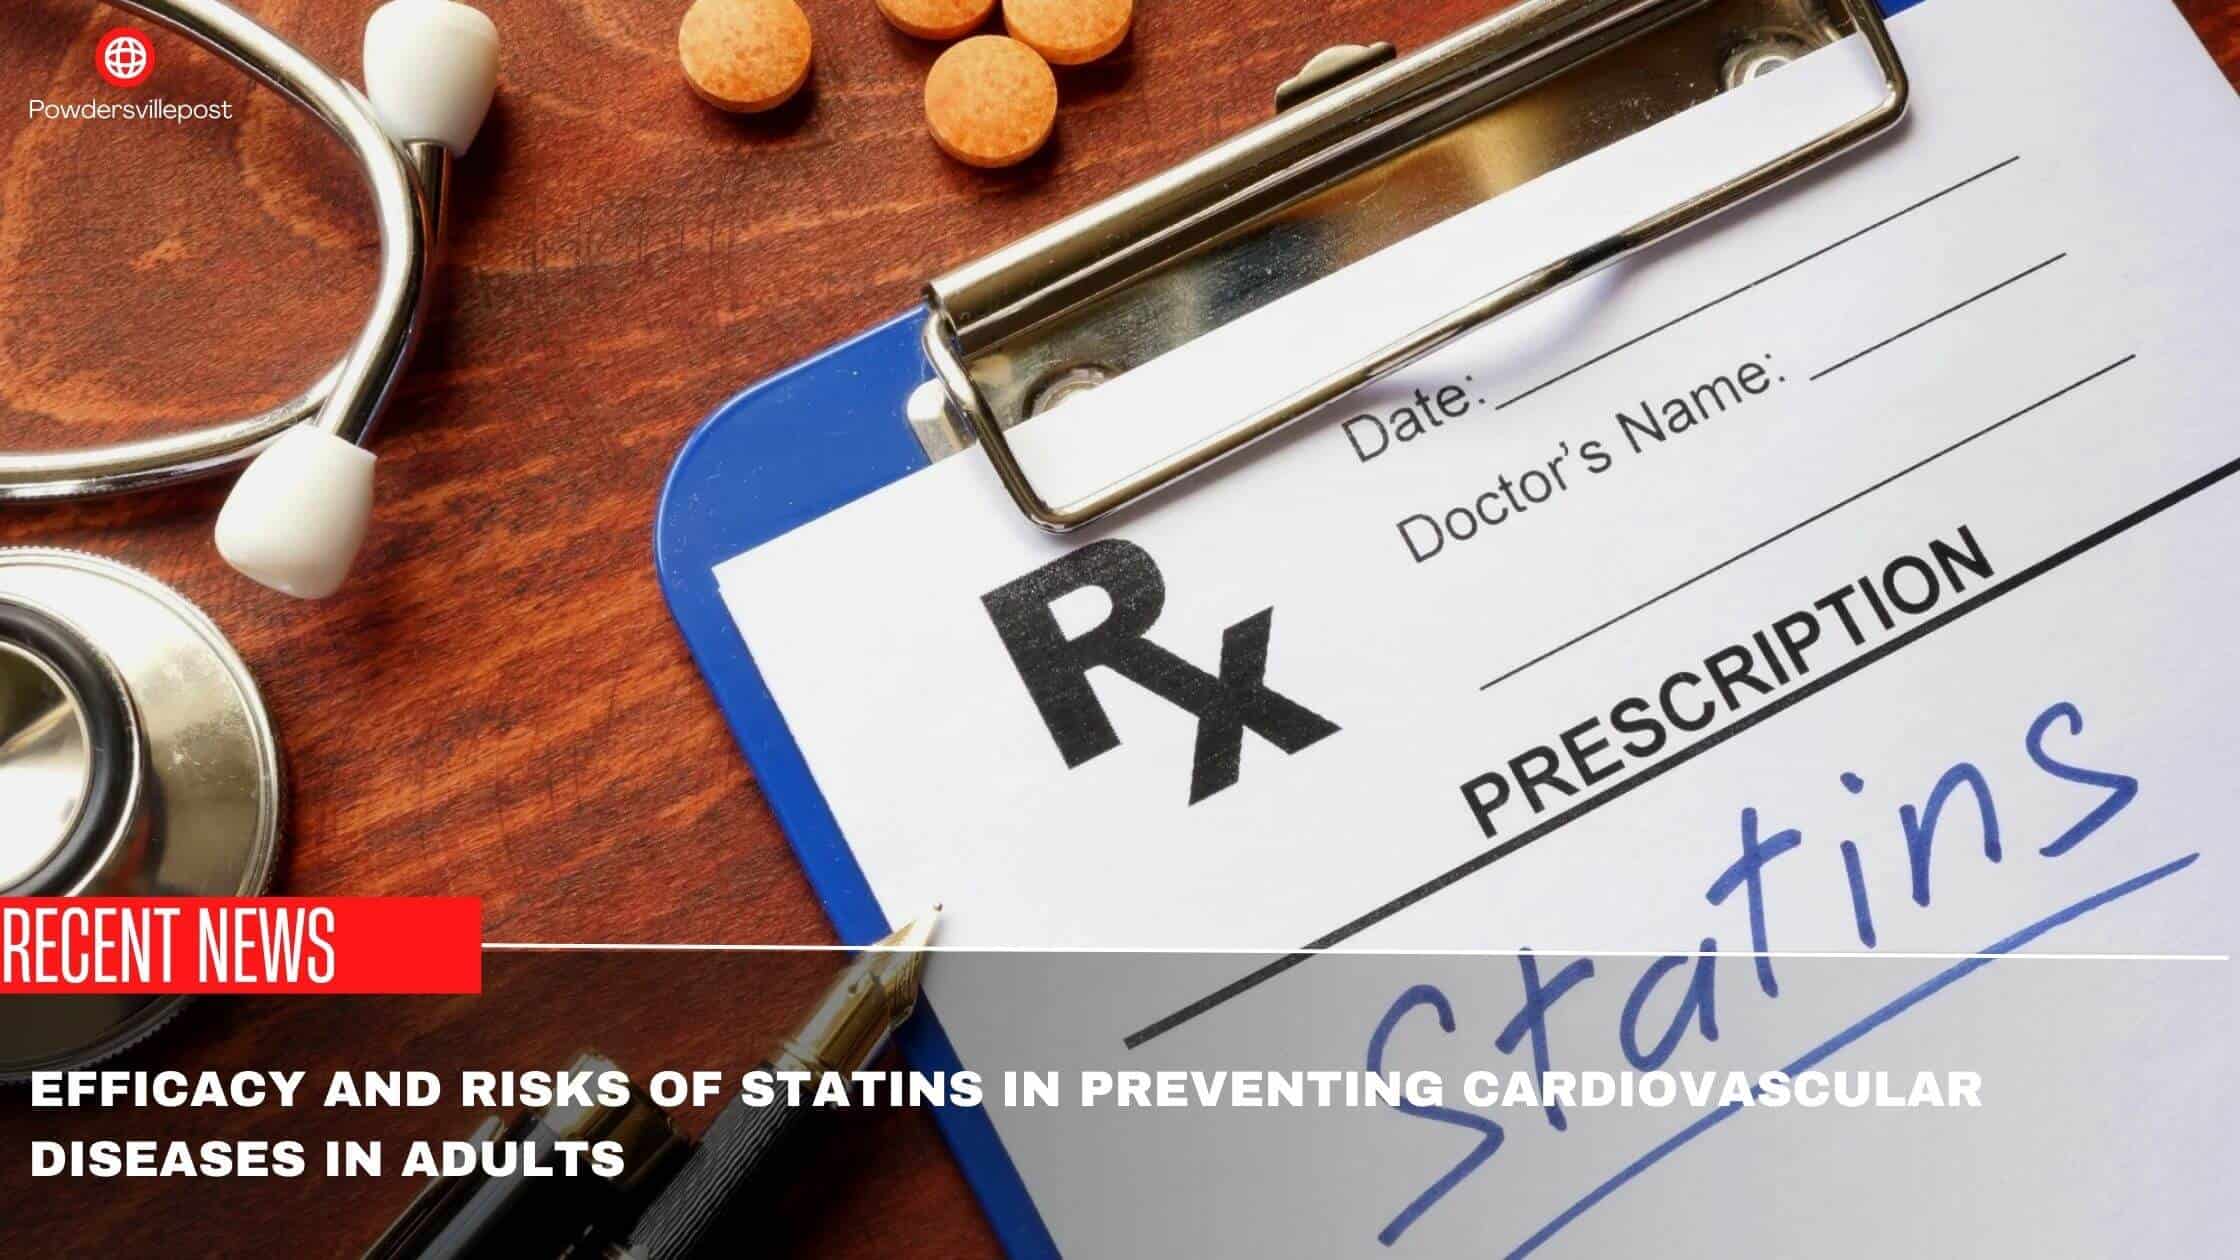 Efficacy And Risks Of Statins In Preventing Cardiovascular Diseases In Adults